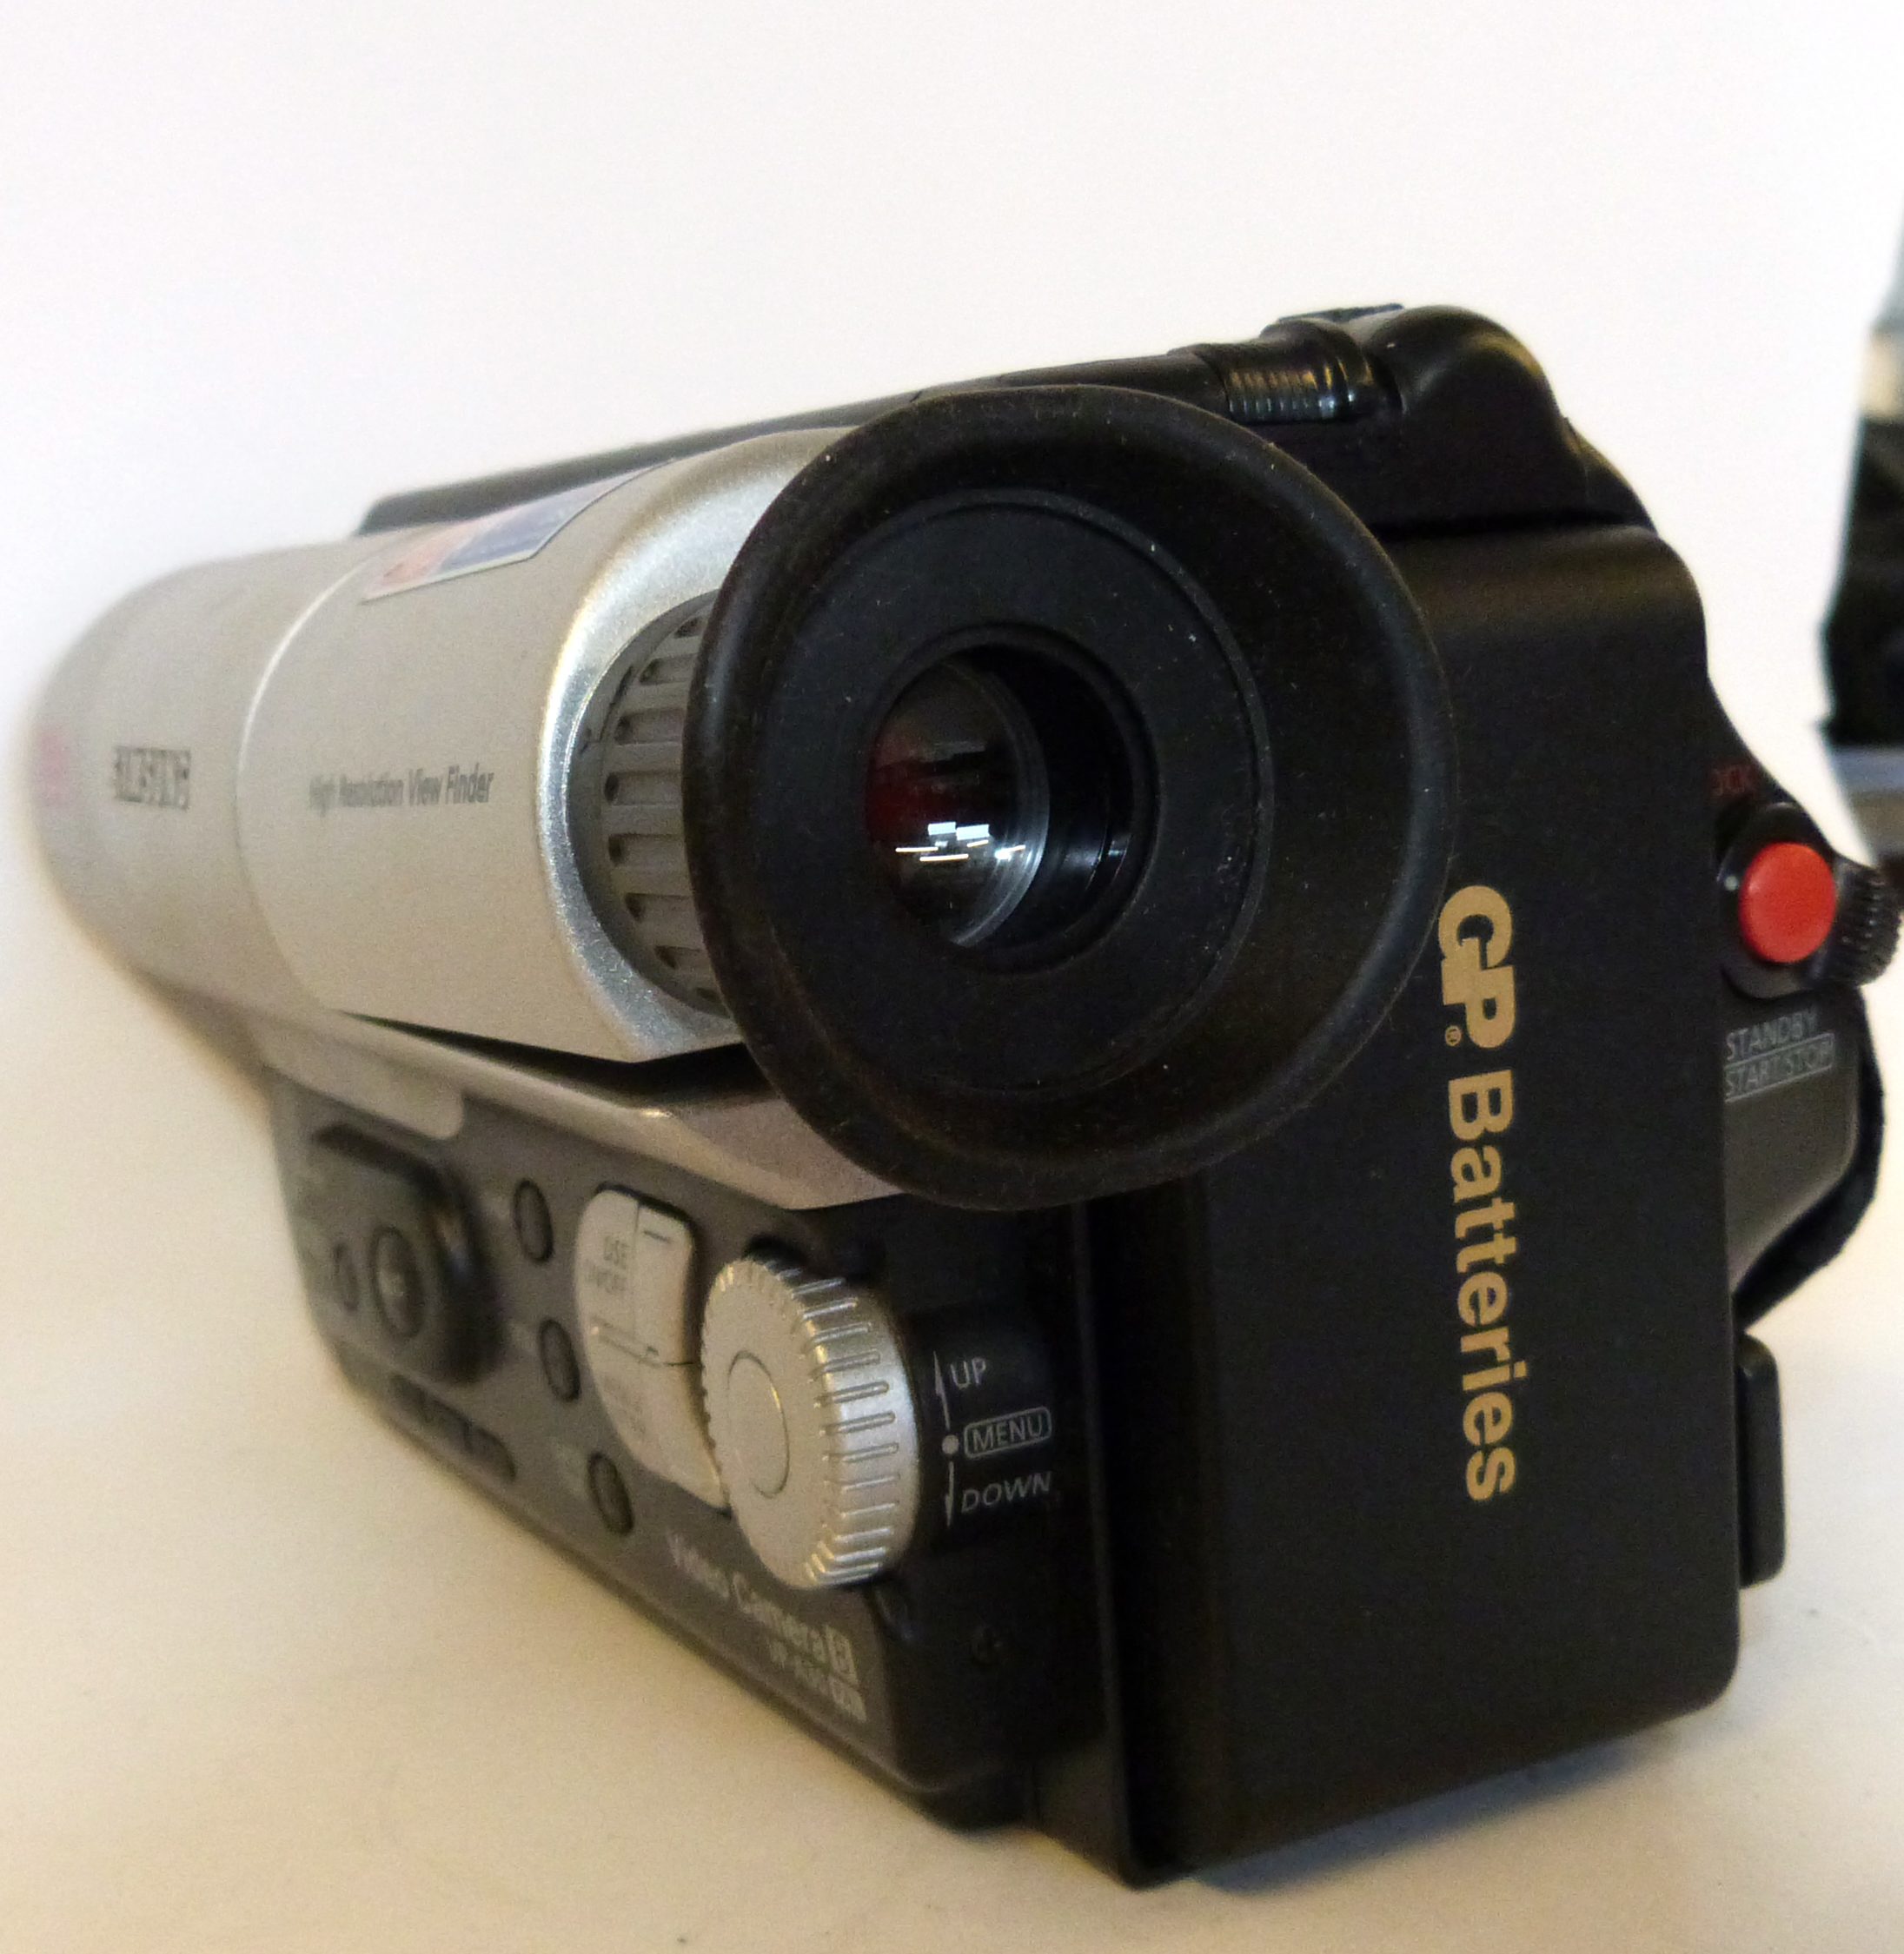 Samsung video camera VP-A30 with case and accessories - Image 3 of 6